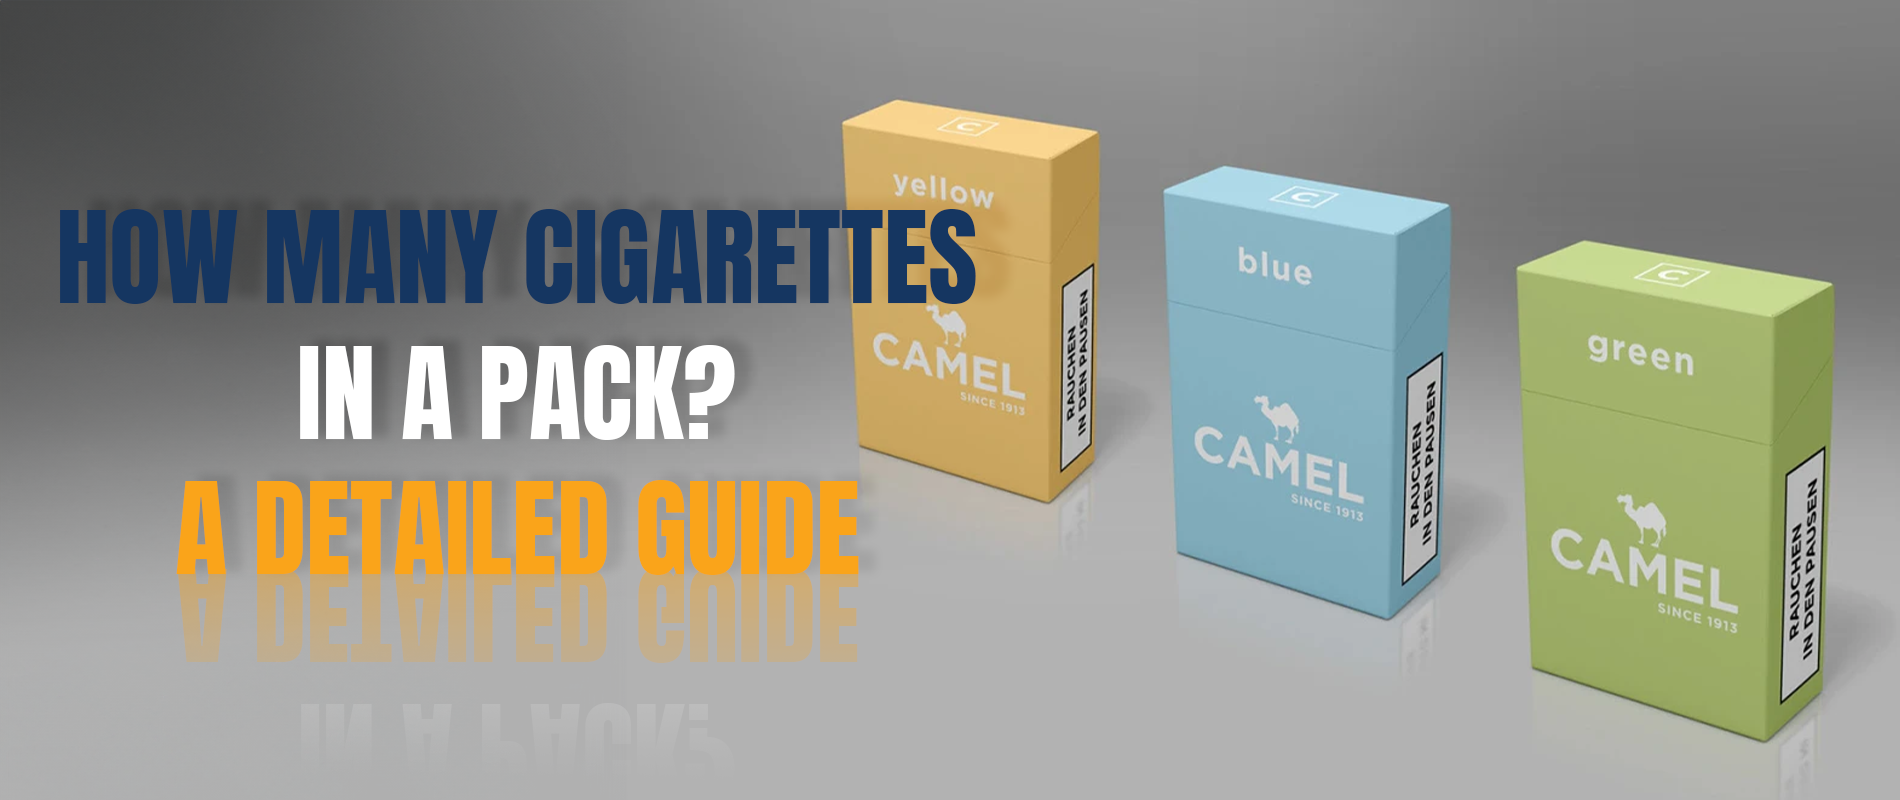 How Many Cigarettes in a Pack? A Detailed Guide